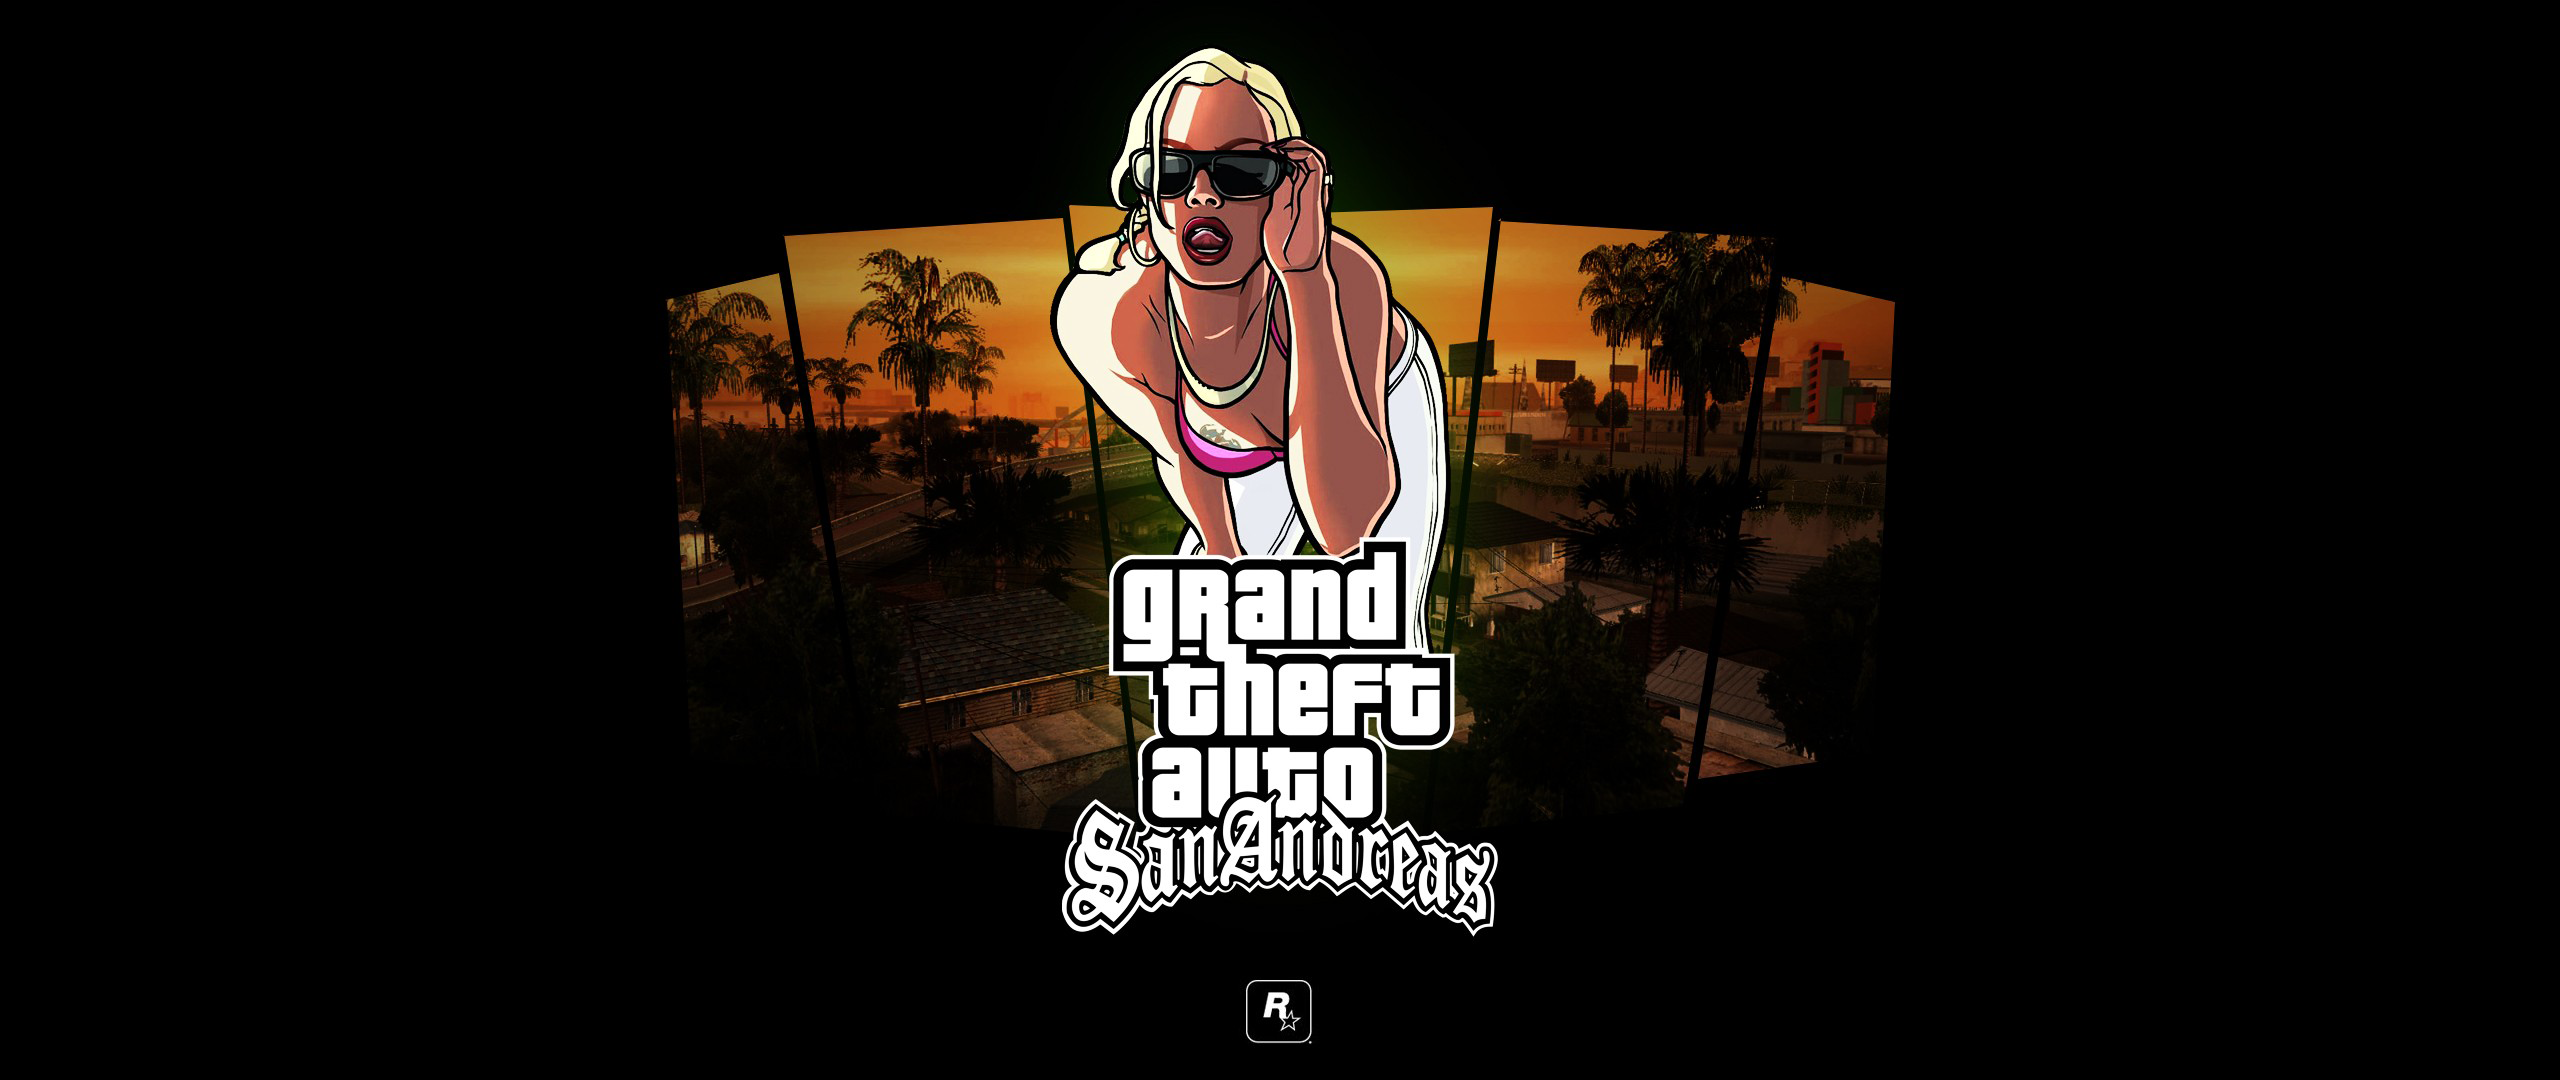 General 2560x1080 ultrawide video games Grand Theft Auto